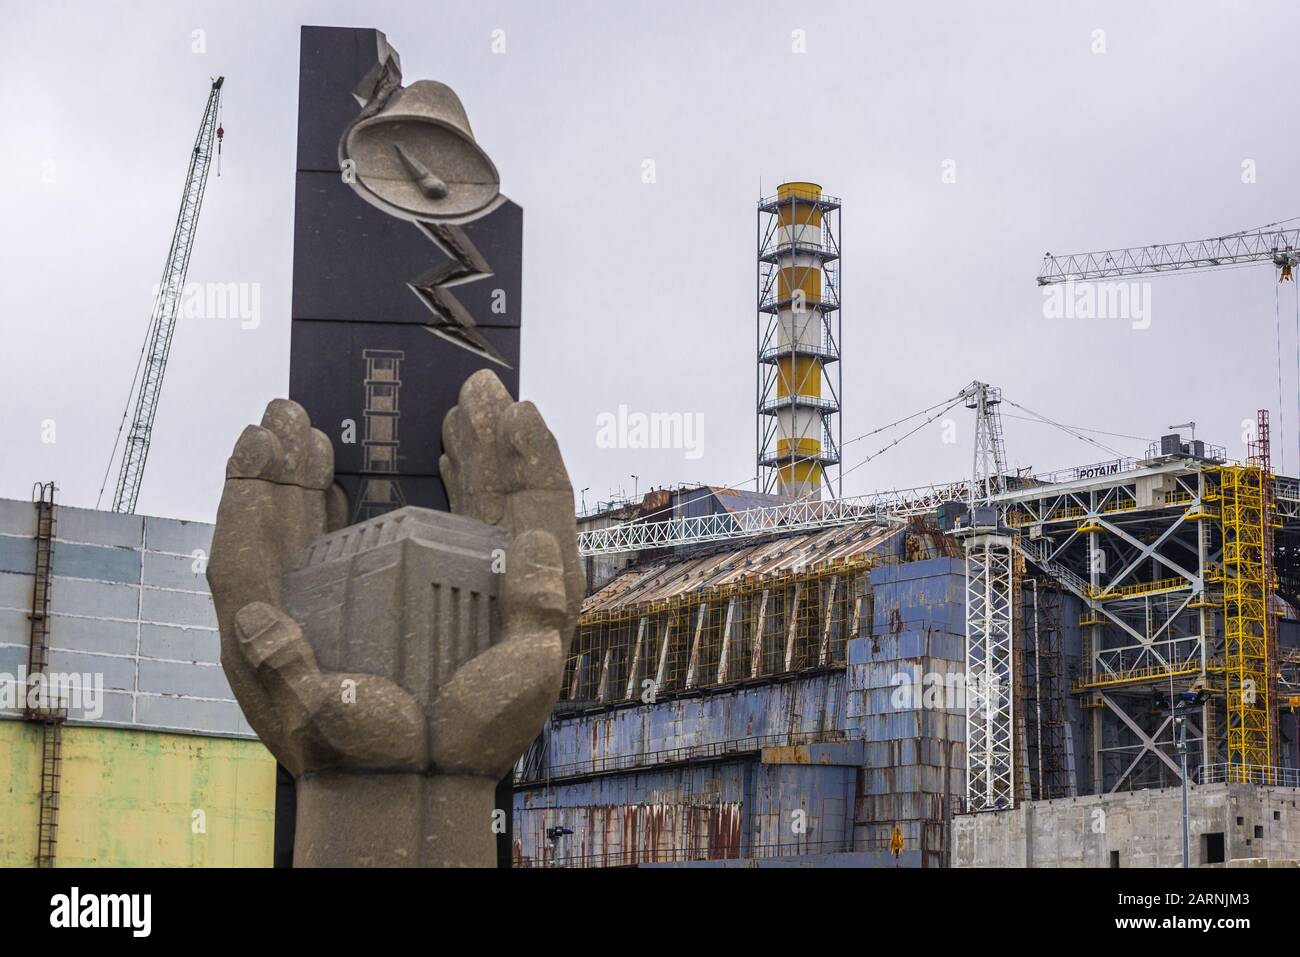 Monument to the Chernobyl Victims and Reactor number 4 old sarcophagus of Chernobyl Nuclear Power Plant in Zone of Alienation, Ukraine Stock Photo